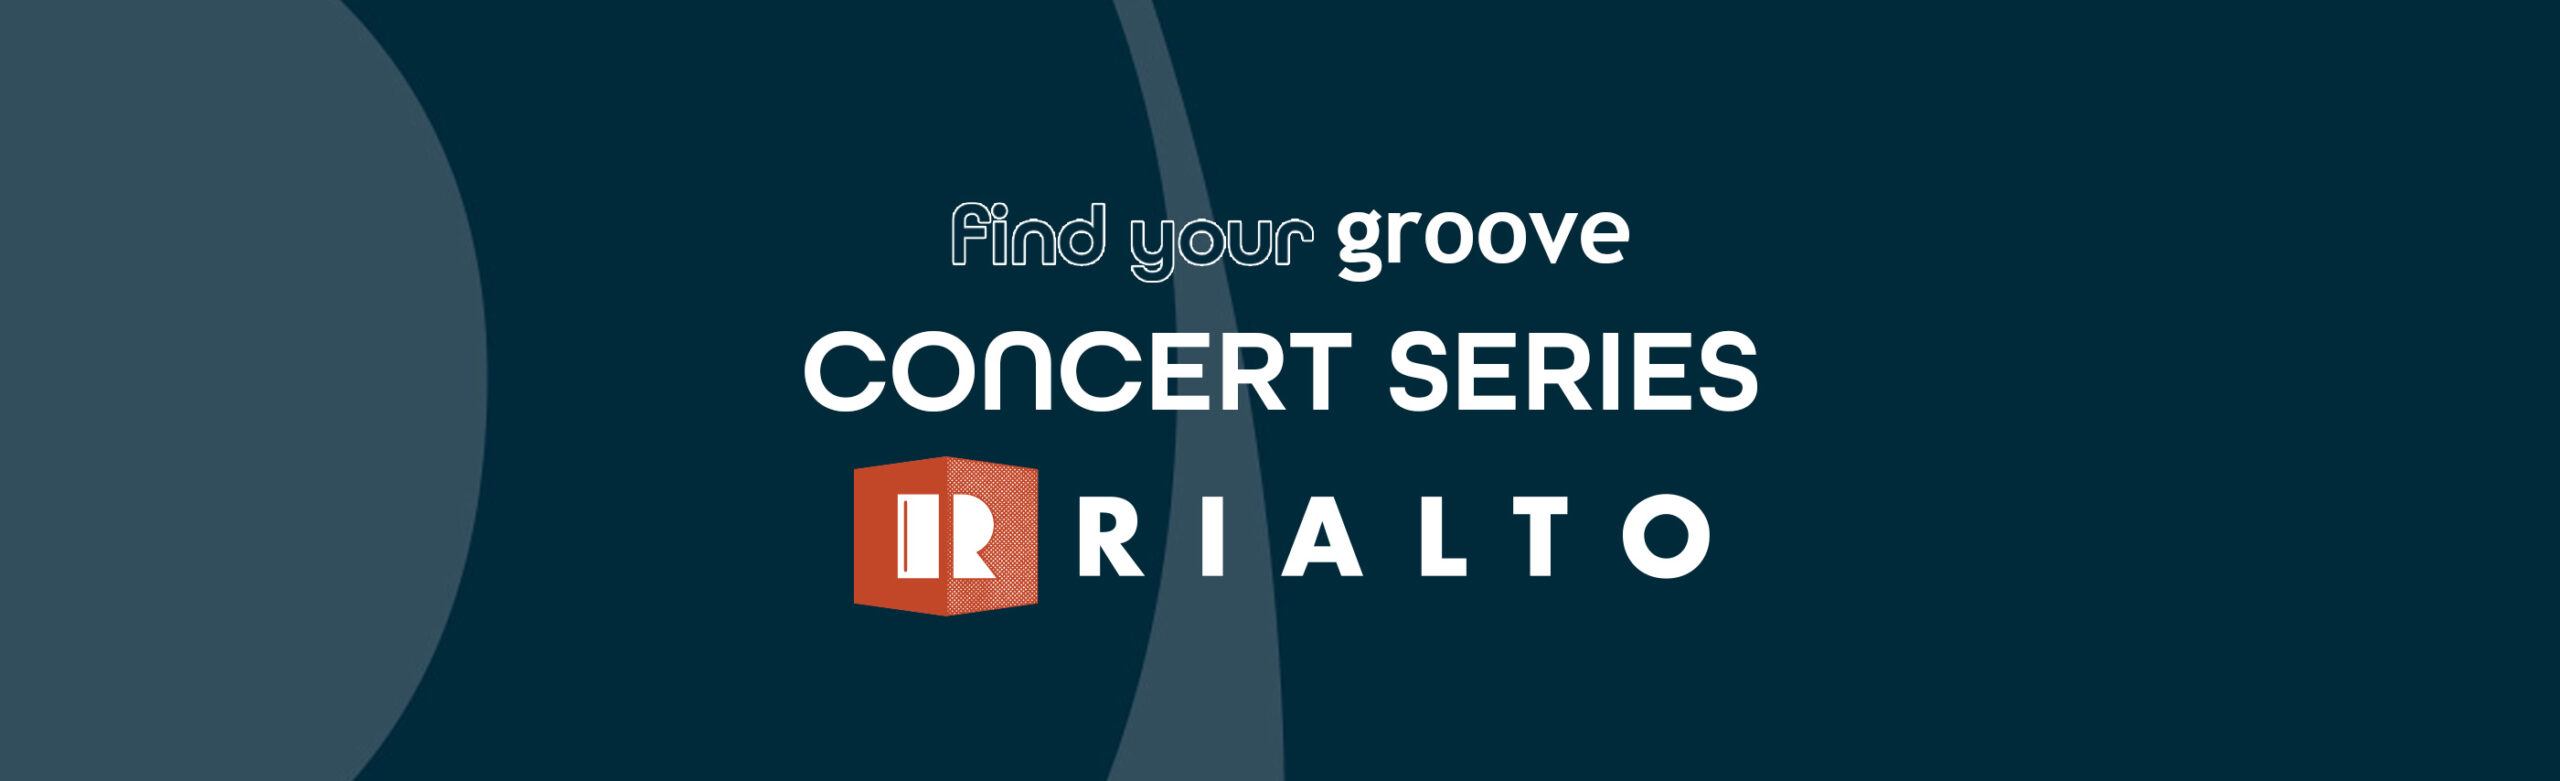 Find Your Groove Free Concert Series – Bozeman